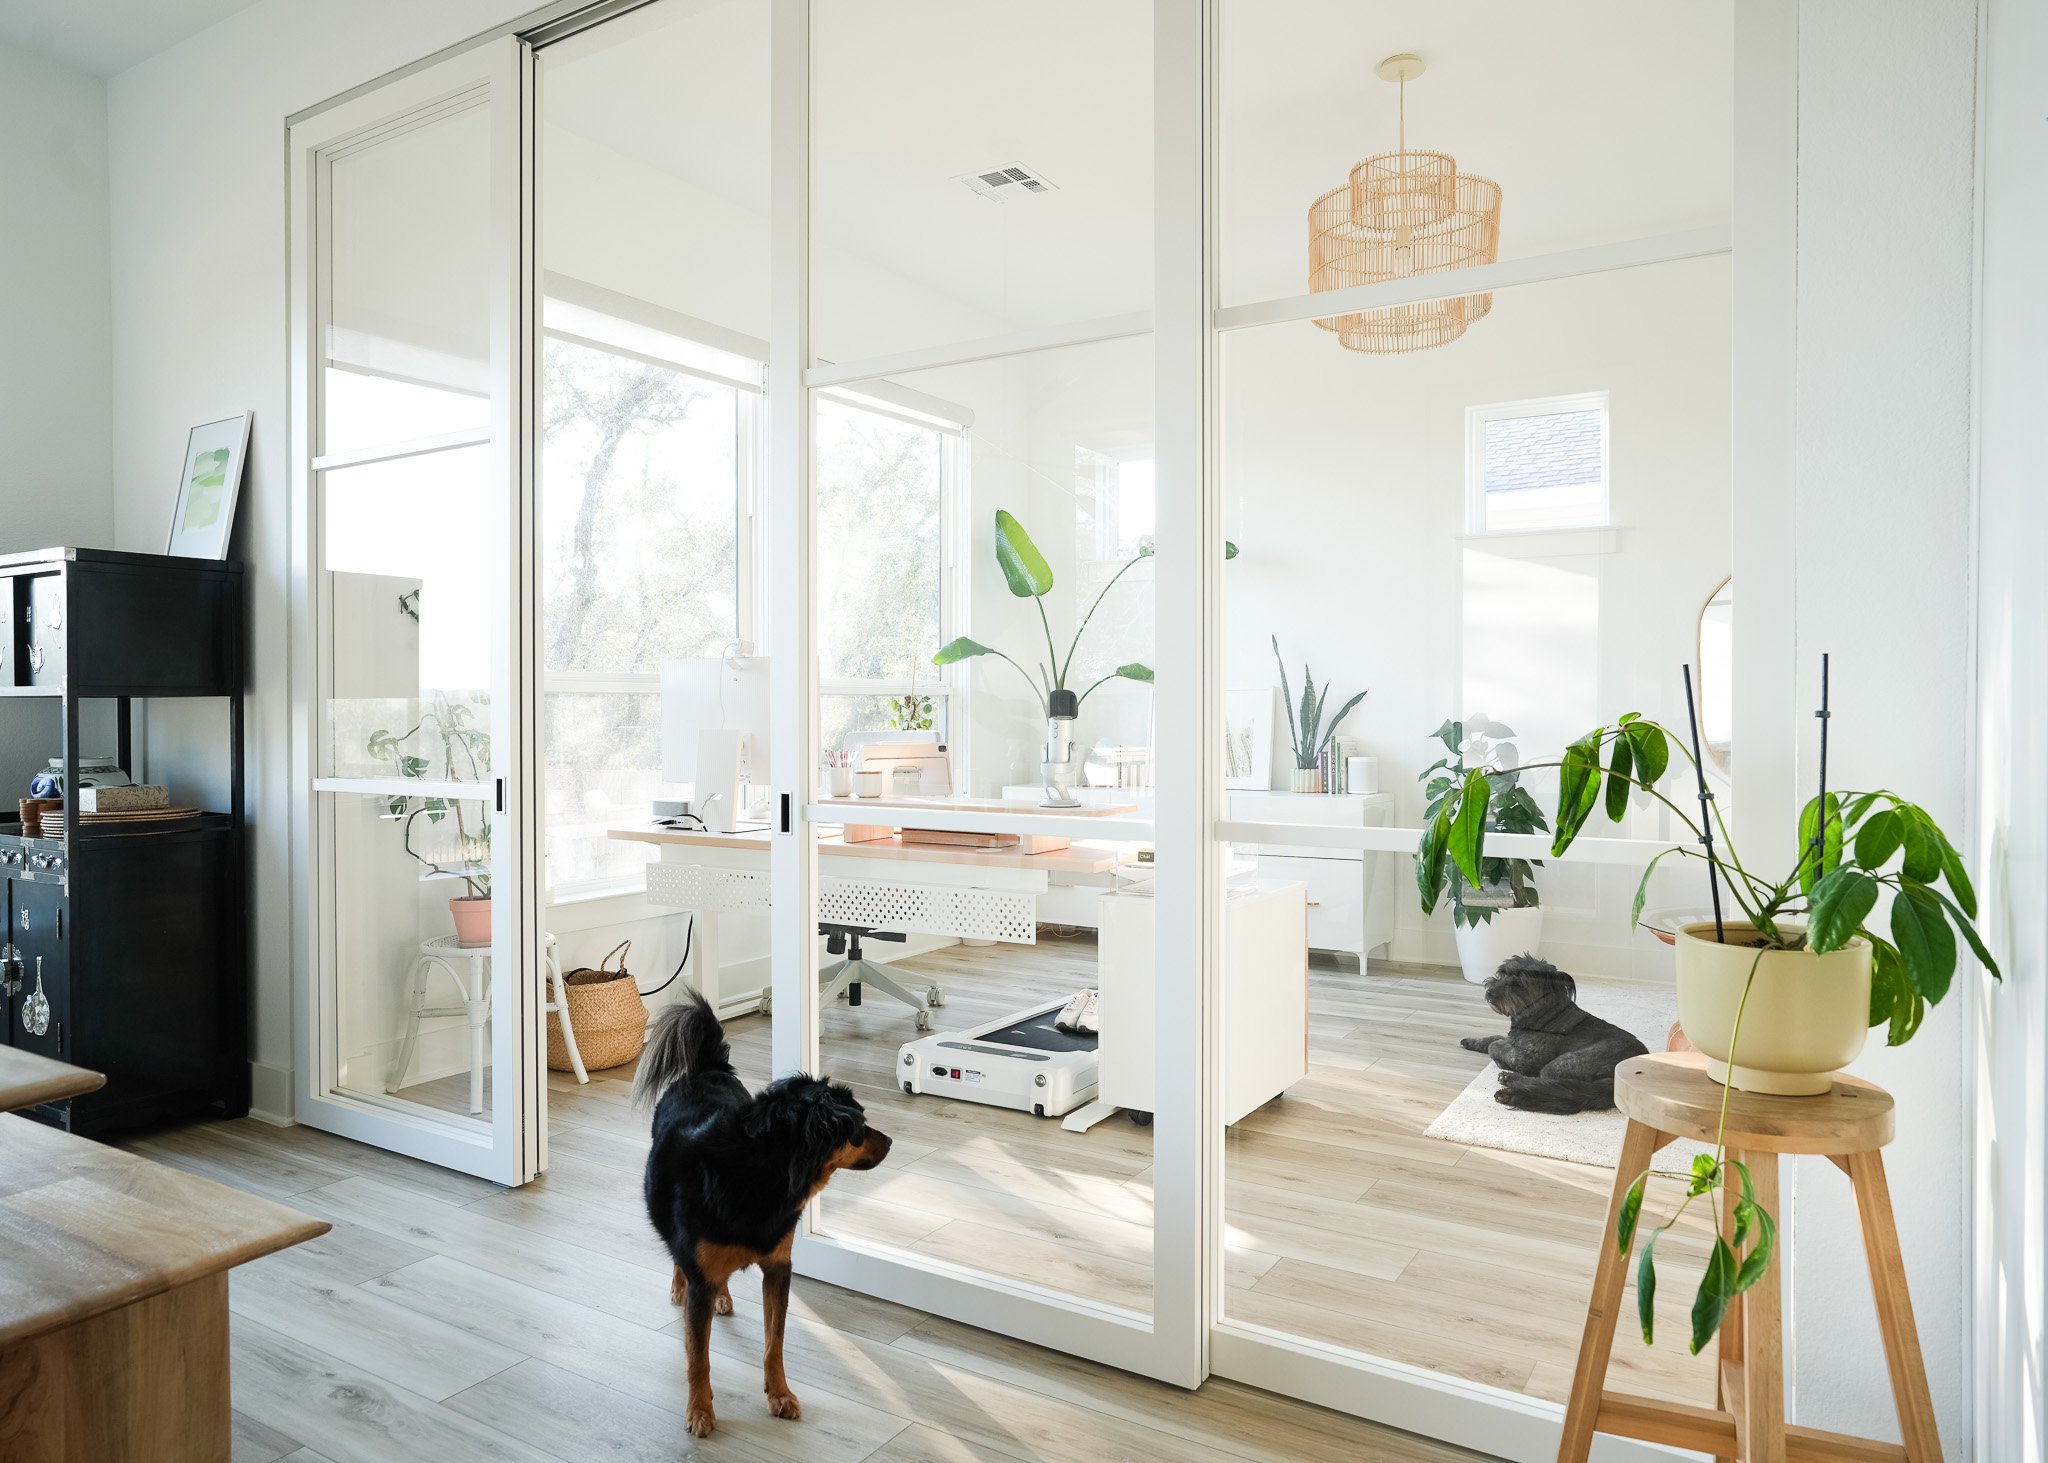 Custom glass doors that look into the home office space